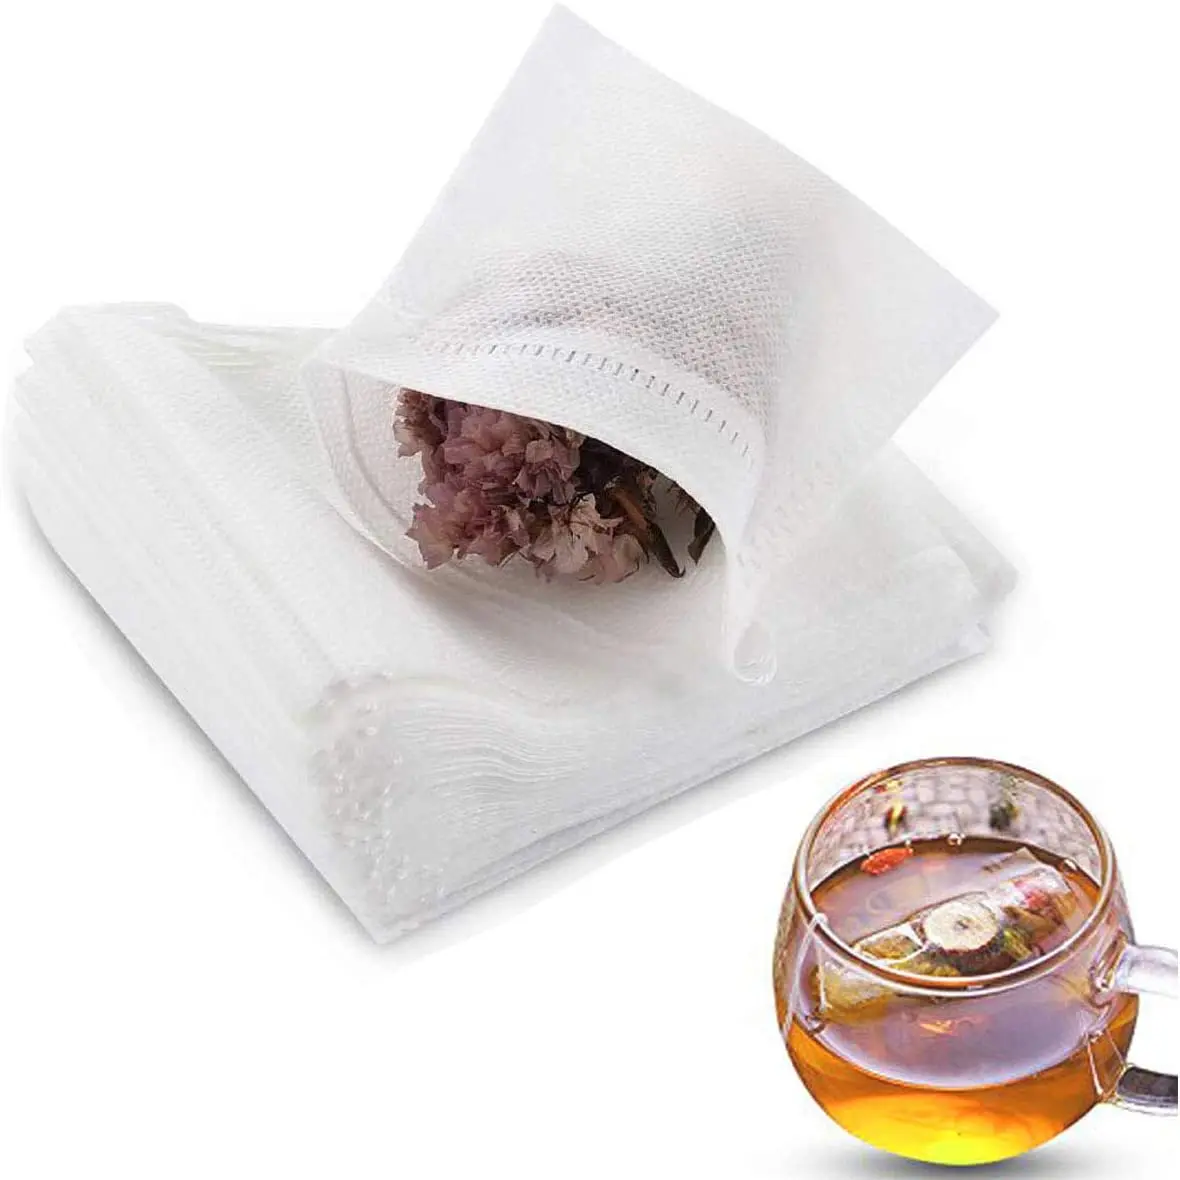 

100/200/500Pcs Disposable Tea Filter Bags for Tea Infuser with String Heal Seal Food Grade Non-woven Fabric Spice Filter Teabags